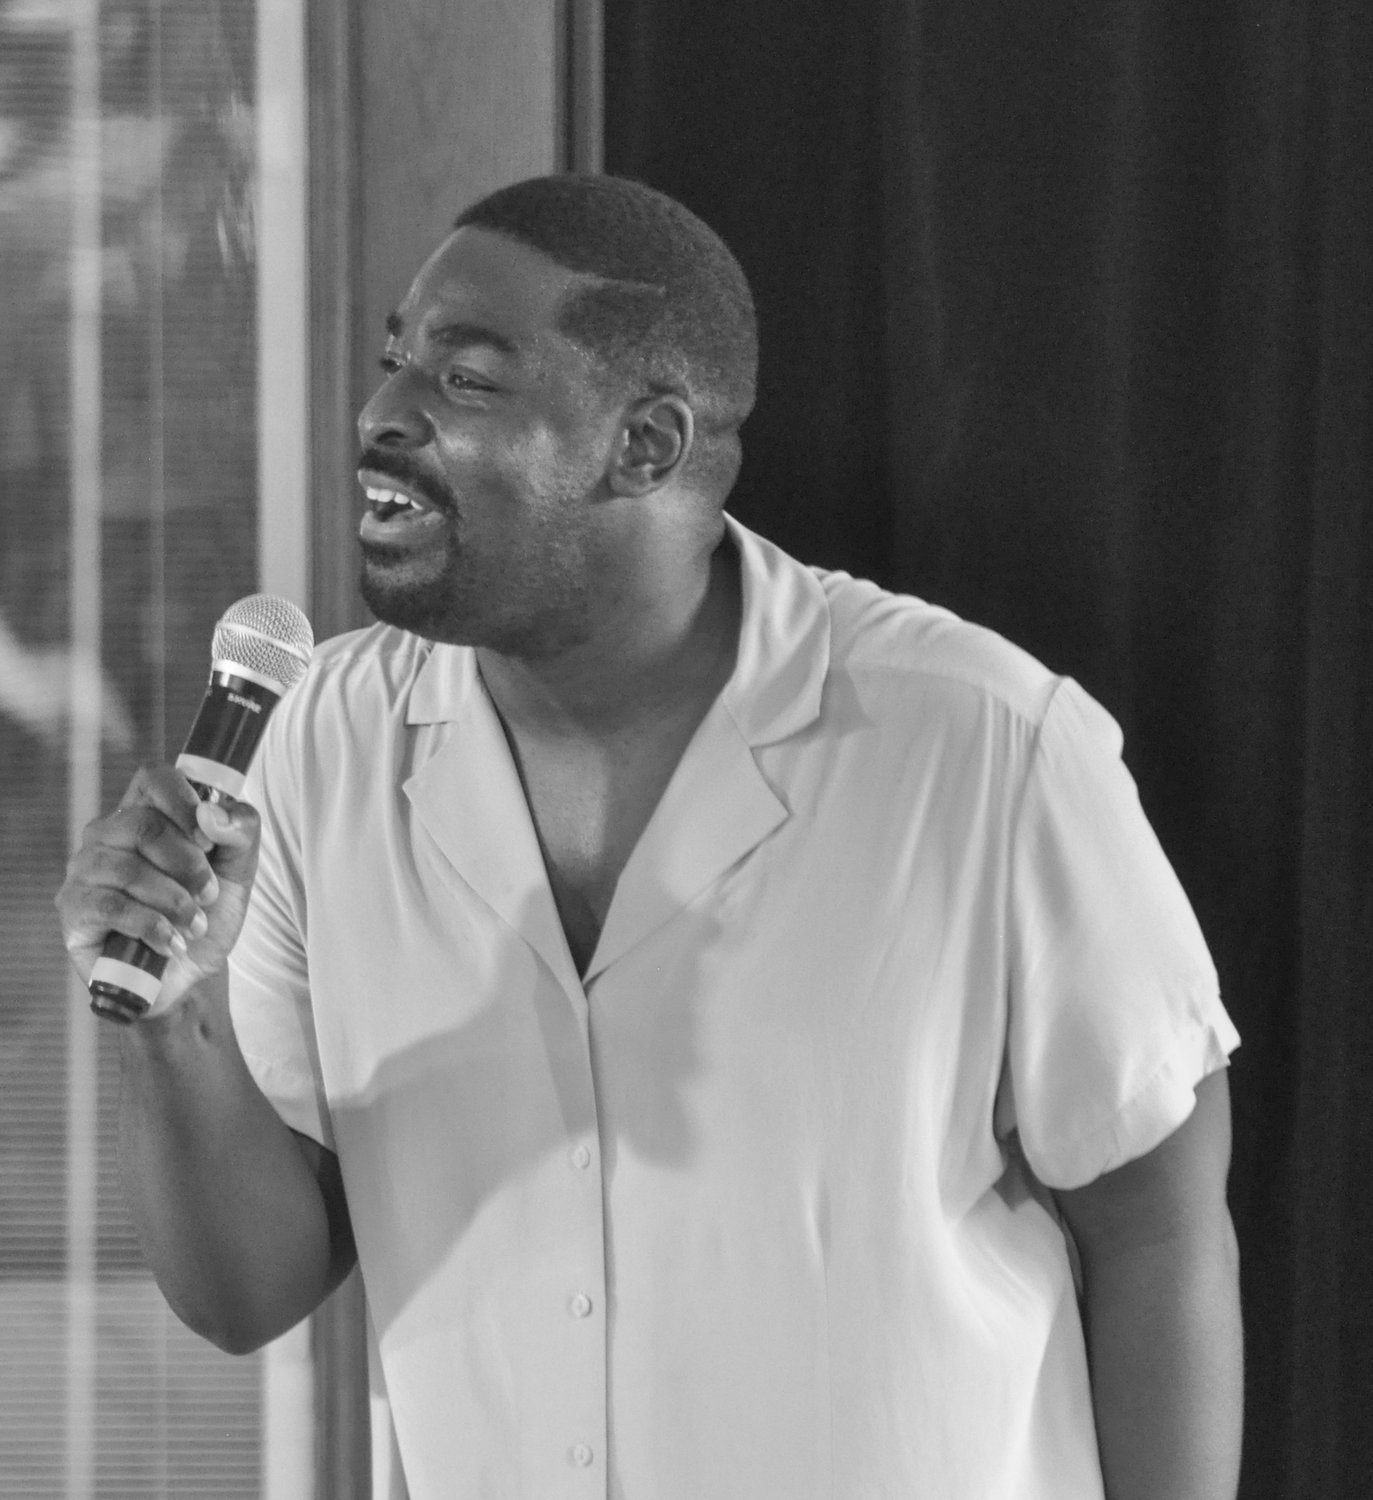 Kyle Taylor Parker (“folks just call me KTP”) wowed the appreciative audience with his powerhouse vocals and unique spin on classic Broadway standards like “I Feel Pretty,” “Run and Tell That” and “Old Man River” culled from his album “Broadway Soul Volume 1.”